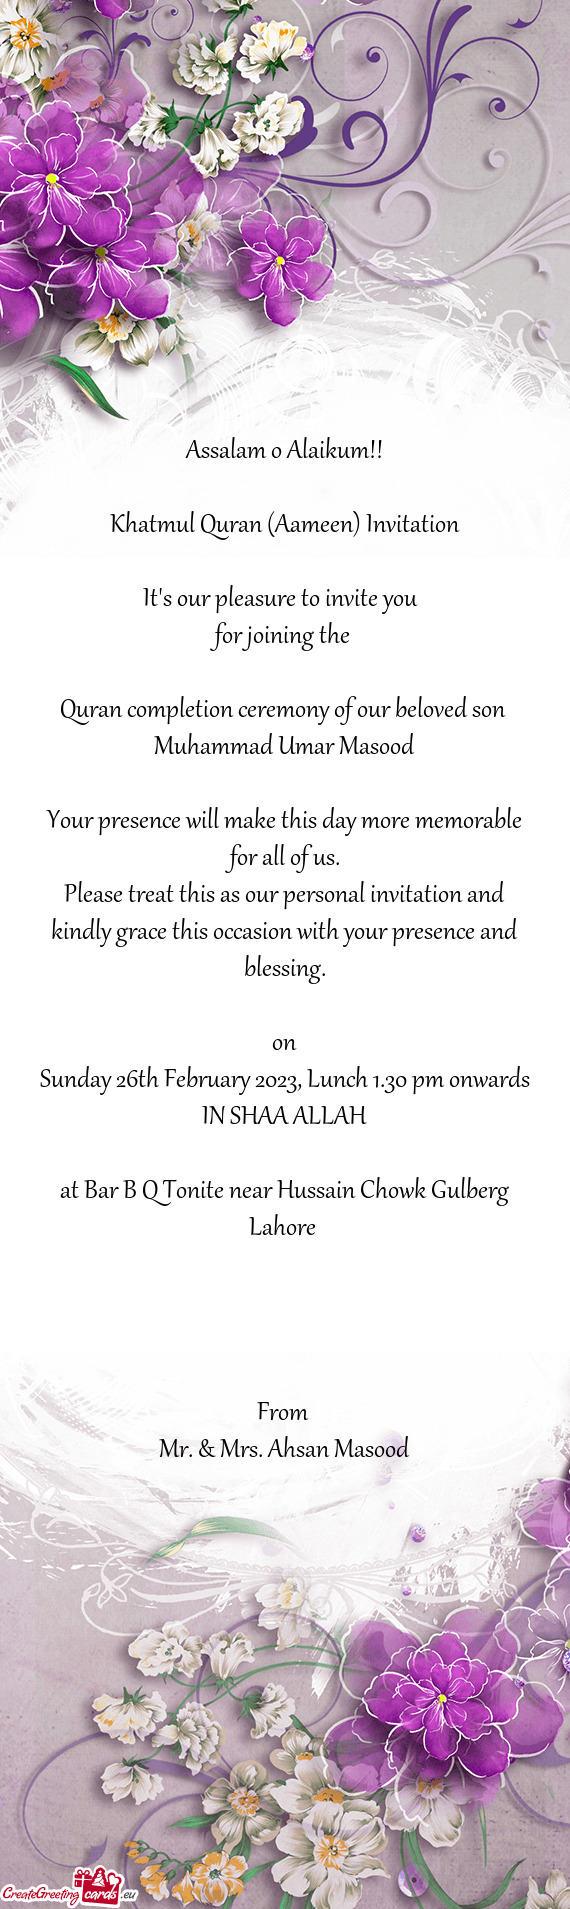 Sunday 26th February 2023, Lunch 1.30 pm onwards IN SHAA ALLAH